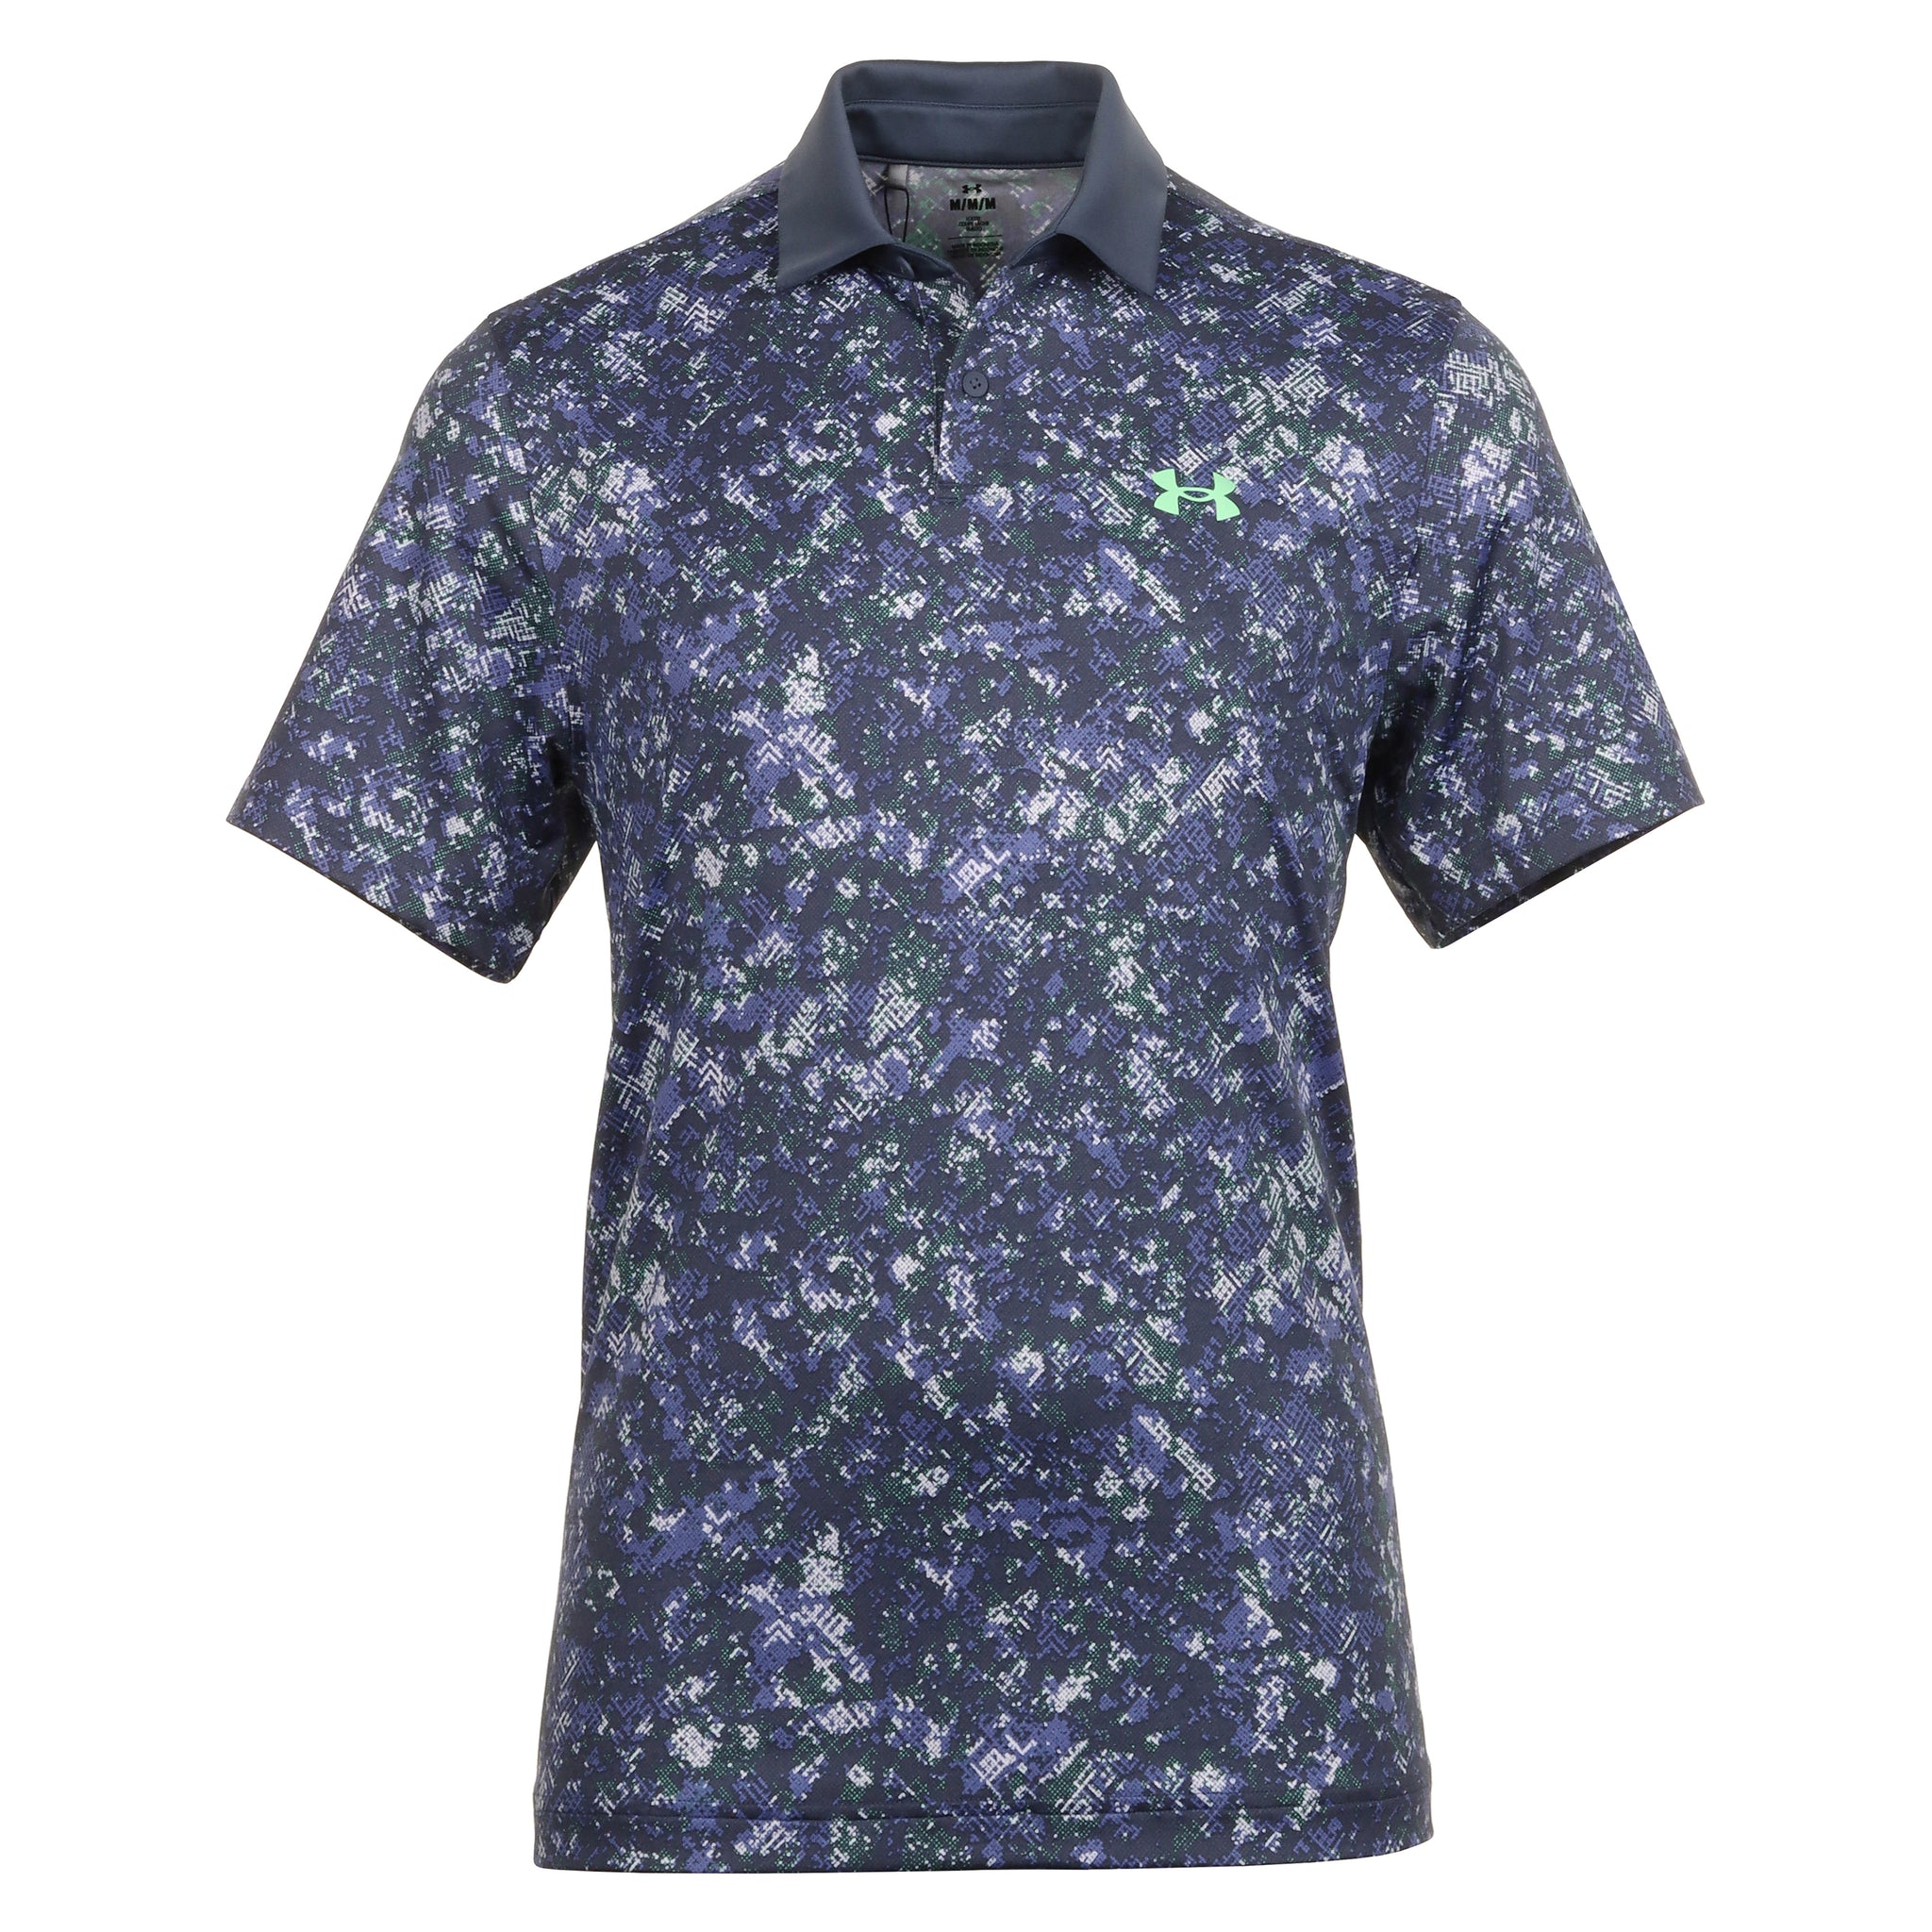 under-armour-golf-t2g-printed-shirt-1383715-downpour-grey-starlight-044